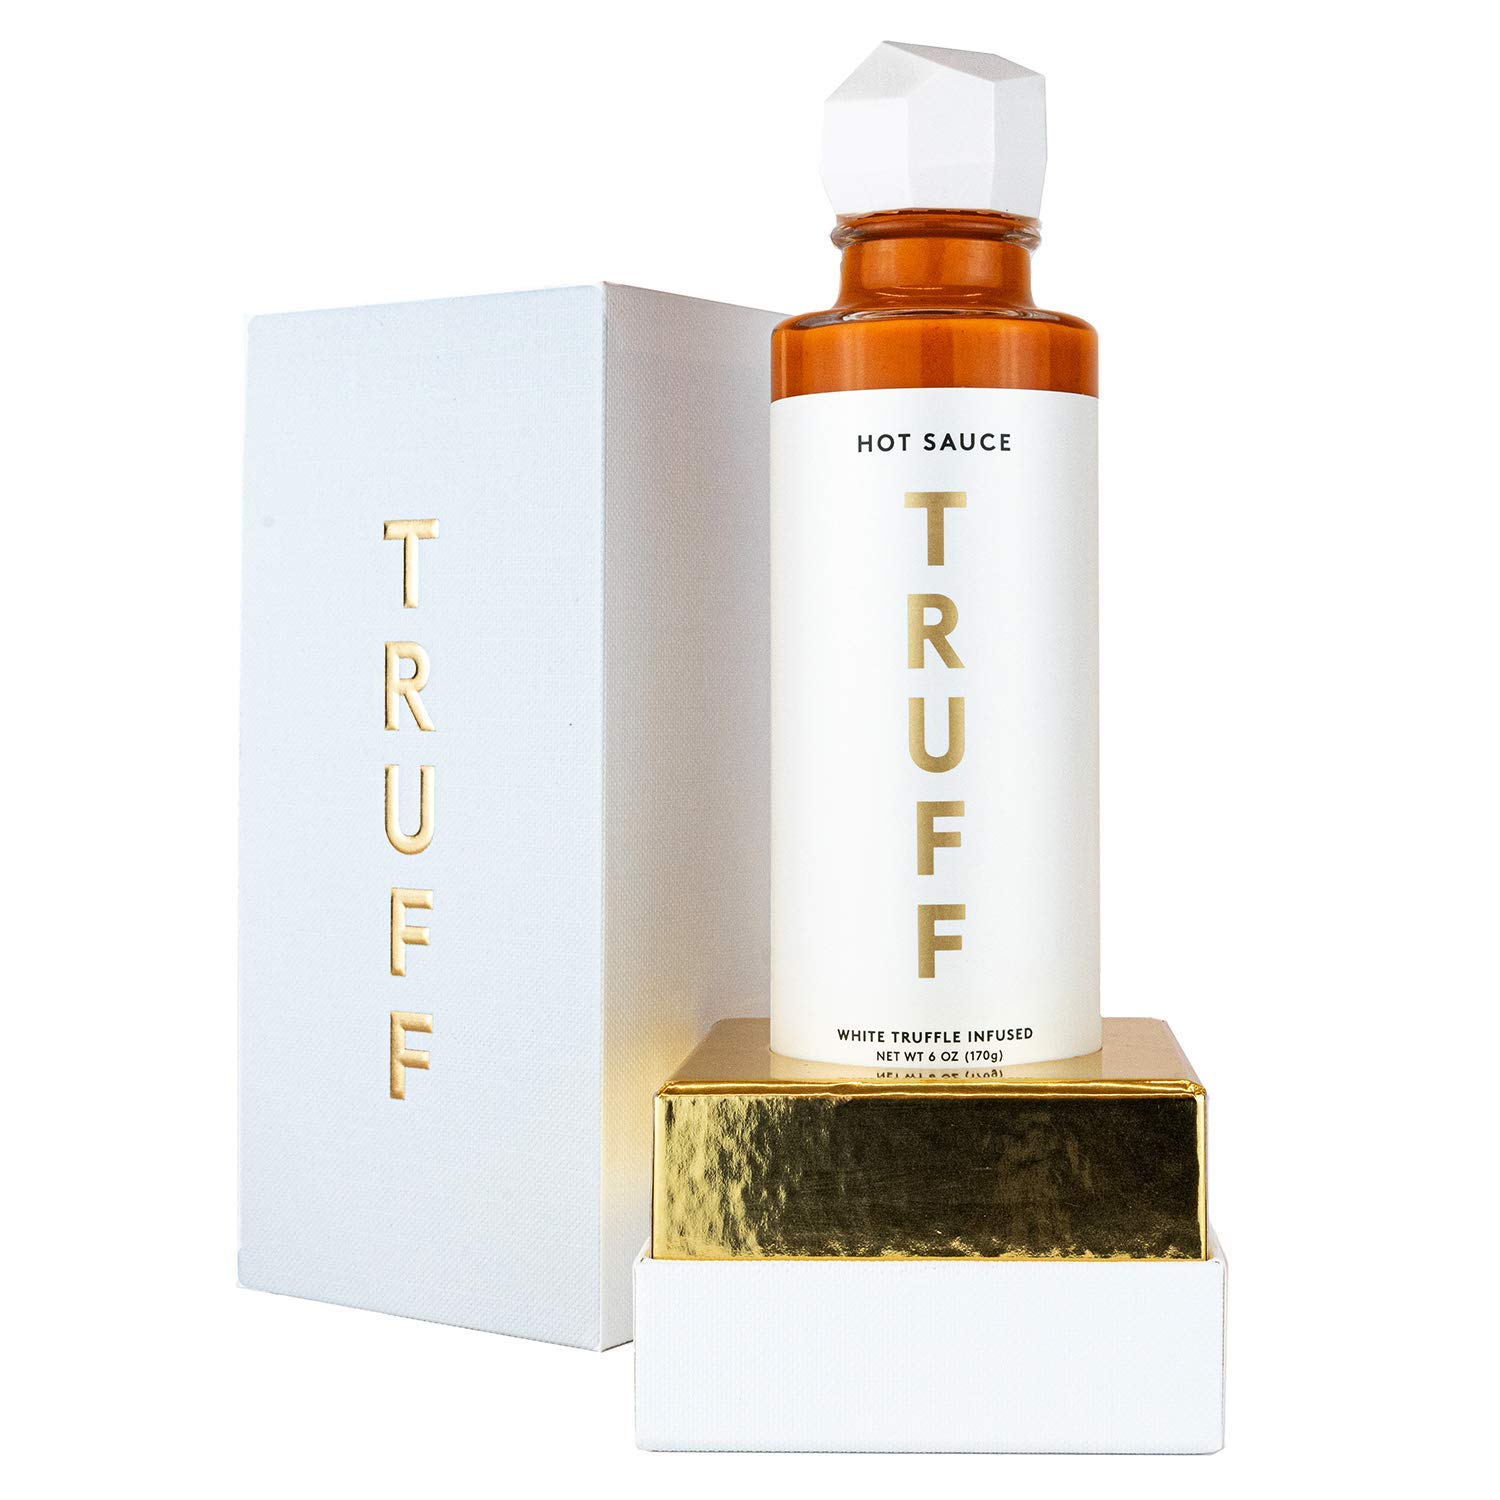 TRUFF Curated White-Truffle Oil Infused Hot Sauce Gift For Men